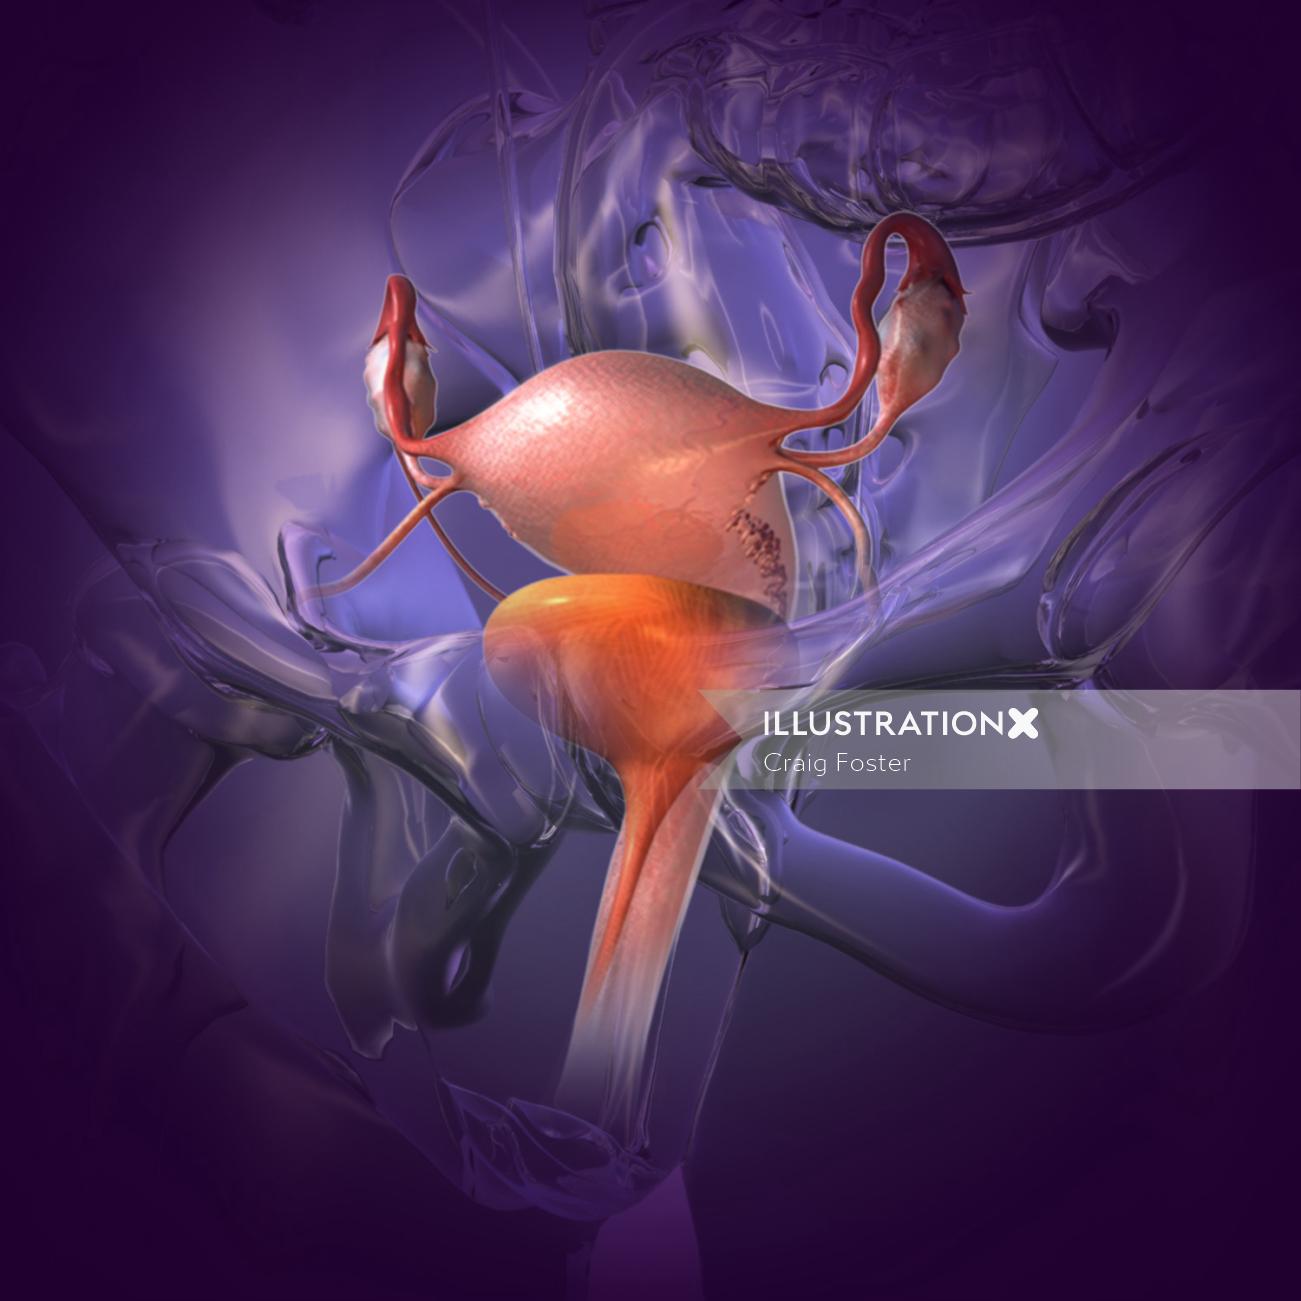 An illustration of Uterus and Bladder with Glass Anatomy